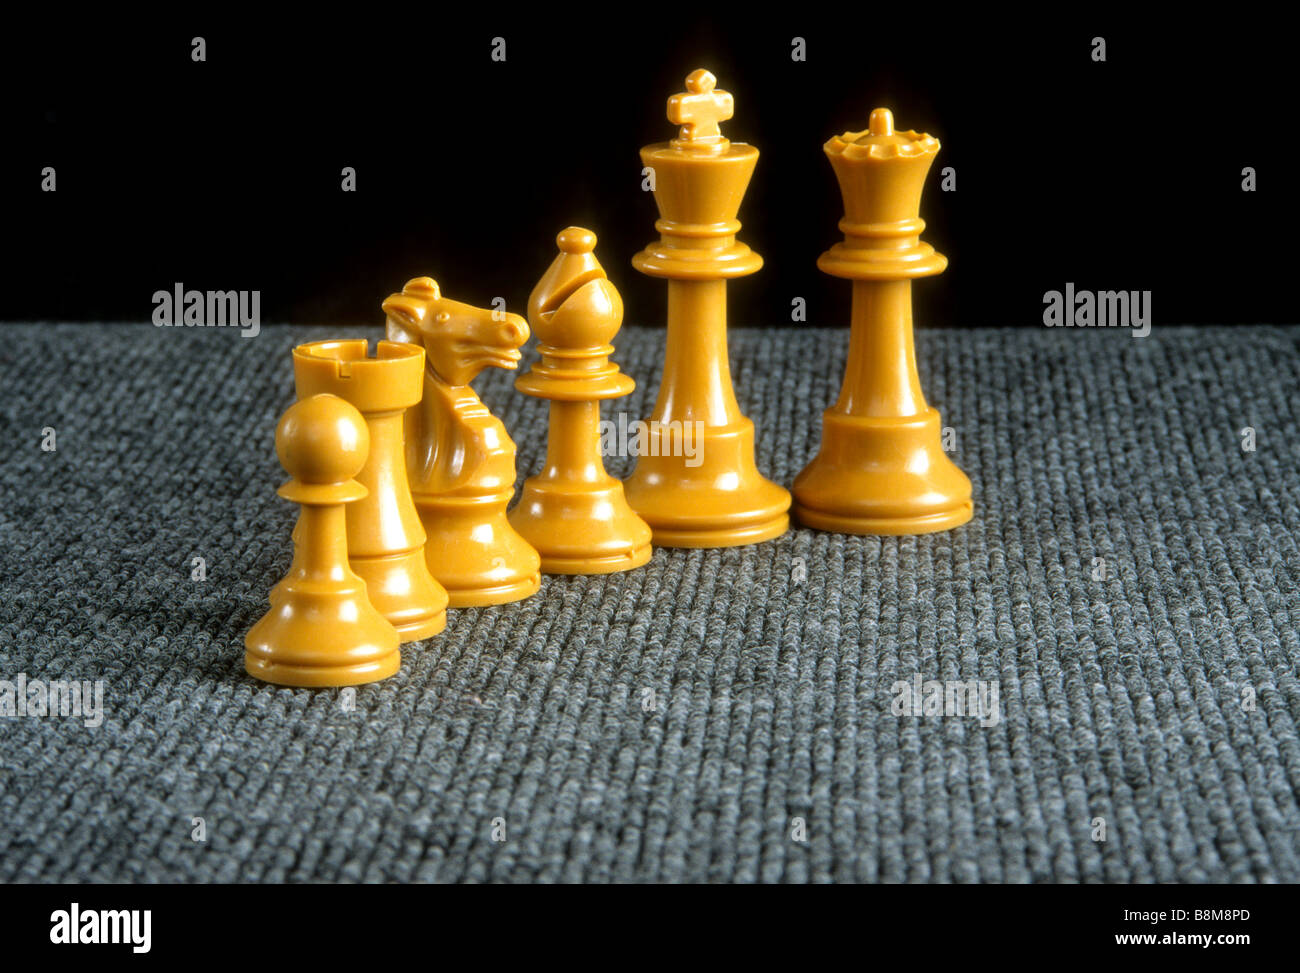 what is the goal of chess